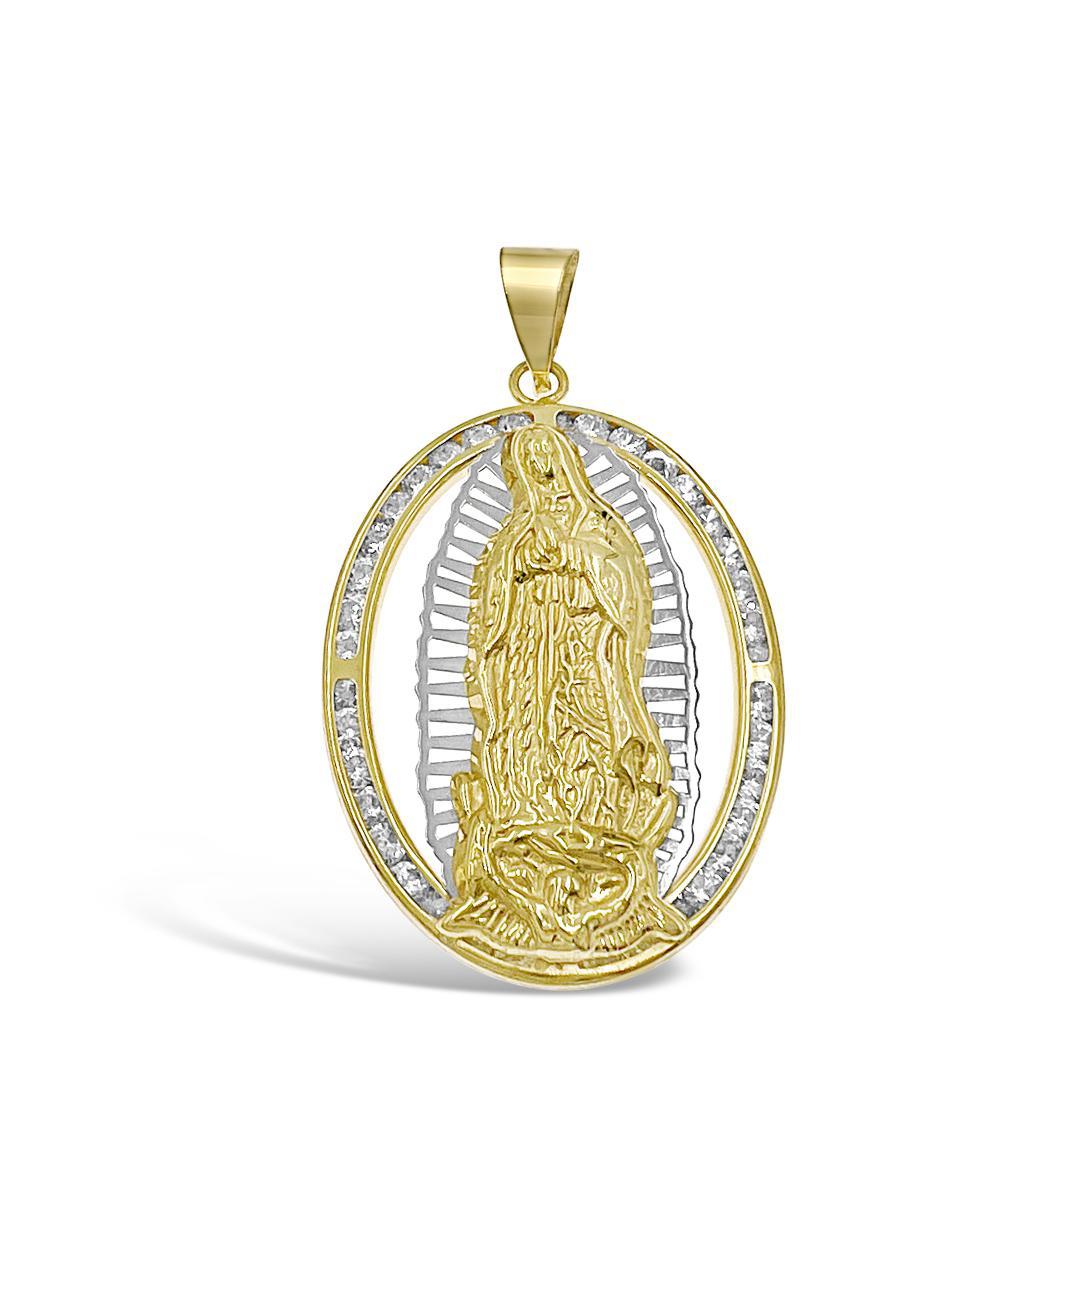 Virgin Mary Pendant 10k Gold Lady Guadalupe Charm 2"